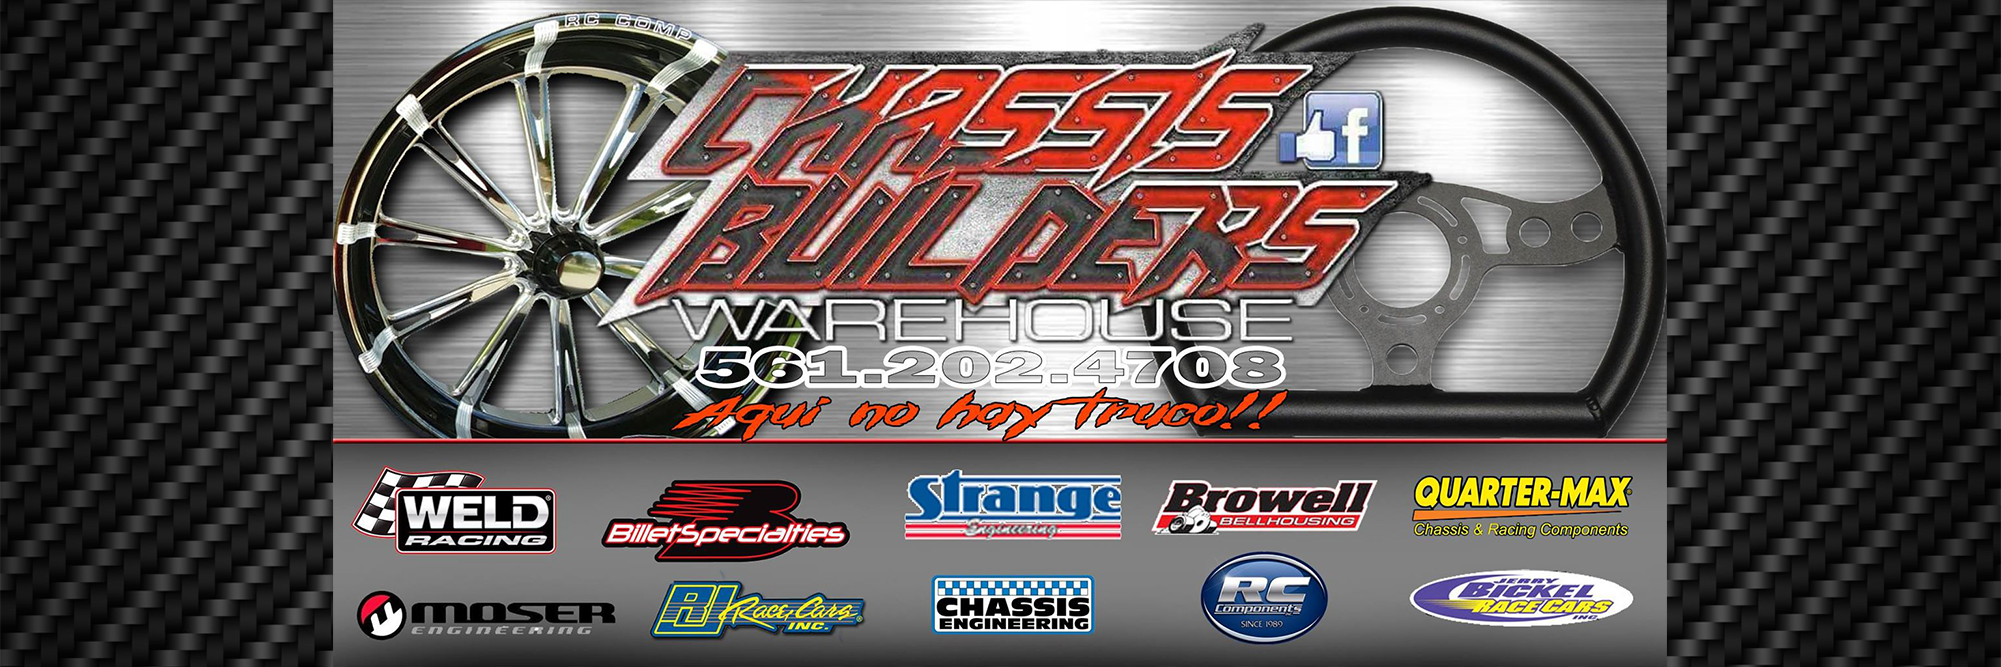 CHASSIS WAREHOUSE BUILDERS